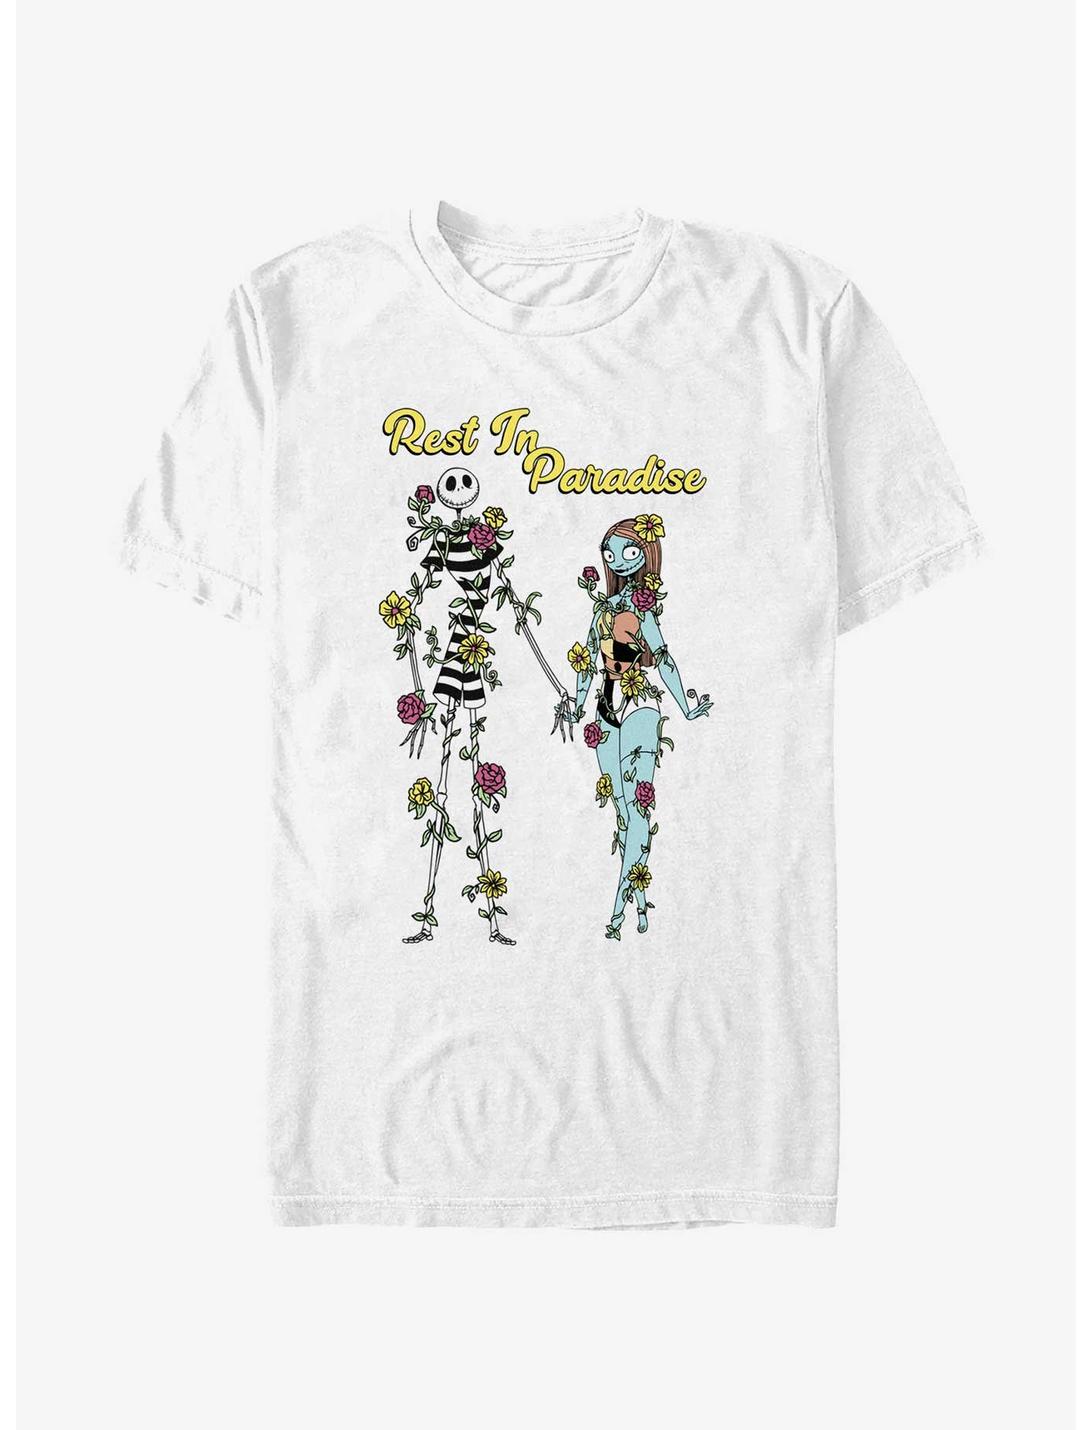 Disney The Nightmare Before Christmas Rest In Paradise T-Shirt, WHITE, hi-res